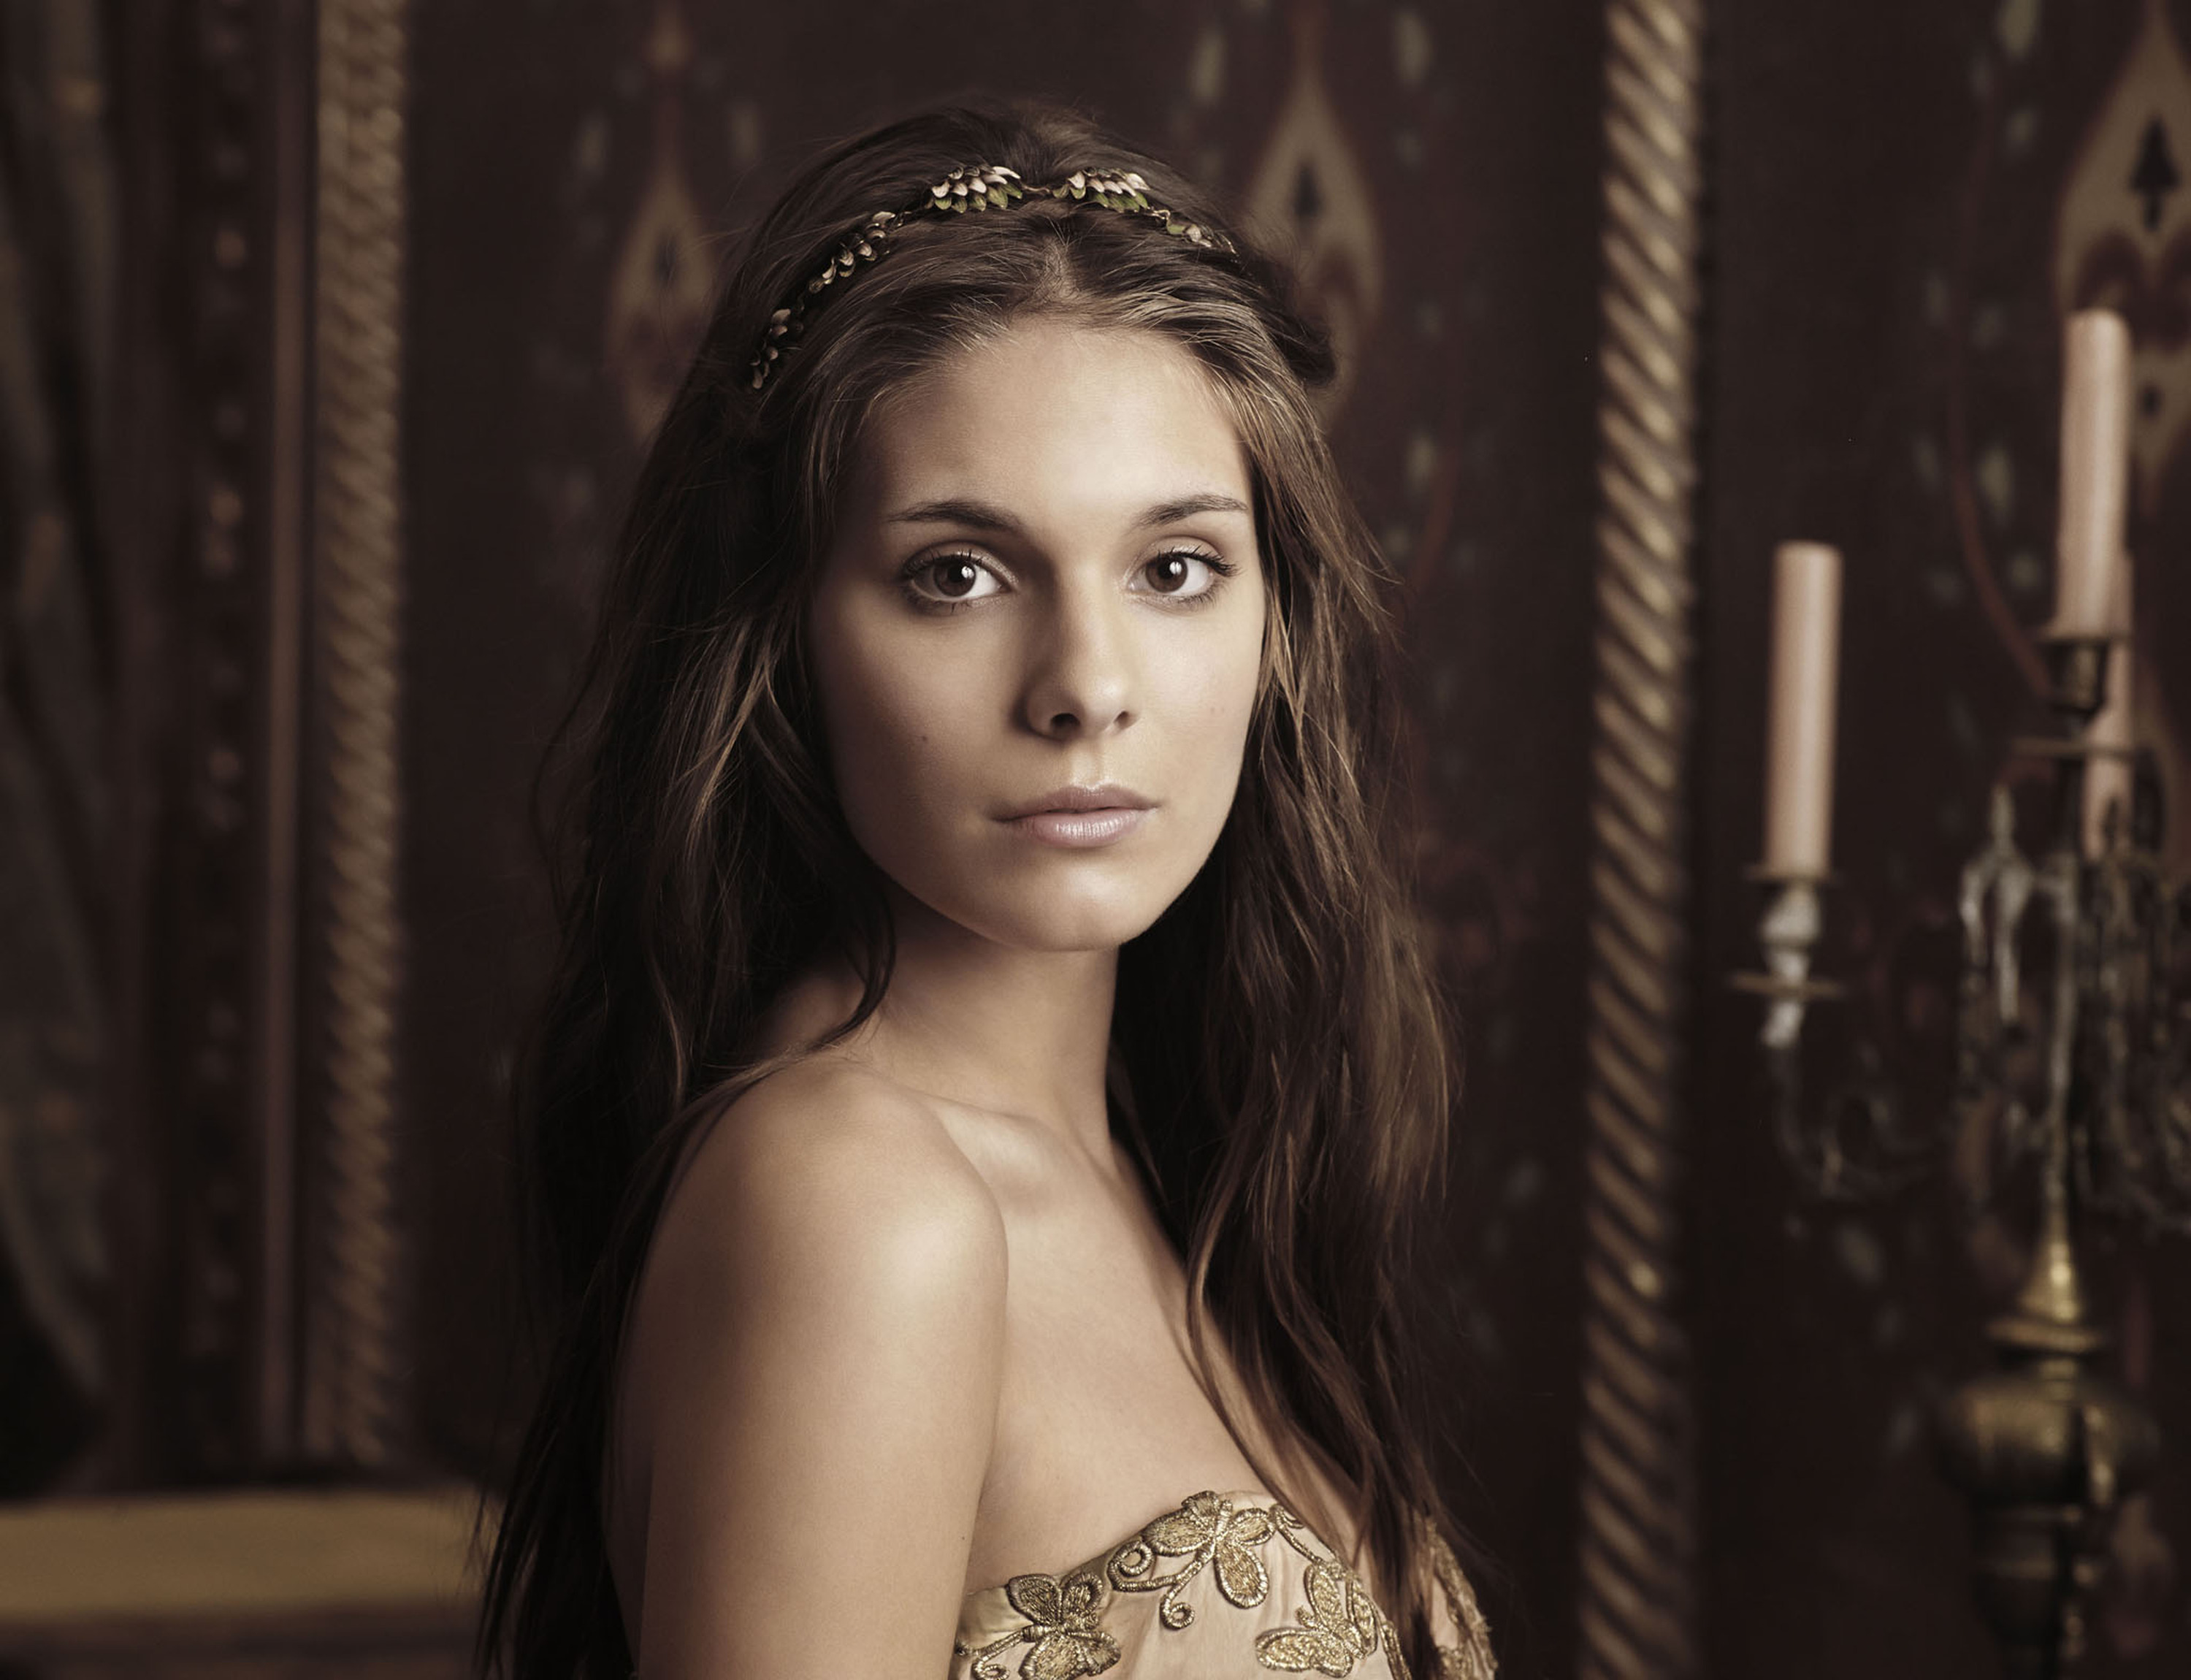 Caitlin Stasey Backgrounds, Compatible - PC, Mobile, Gadgets| 3000x2300 px